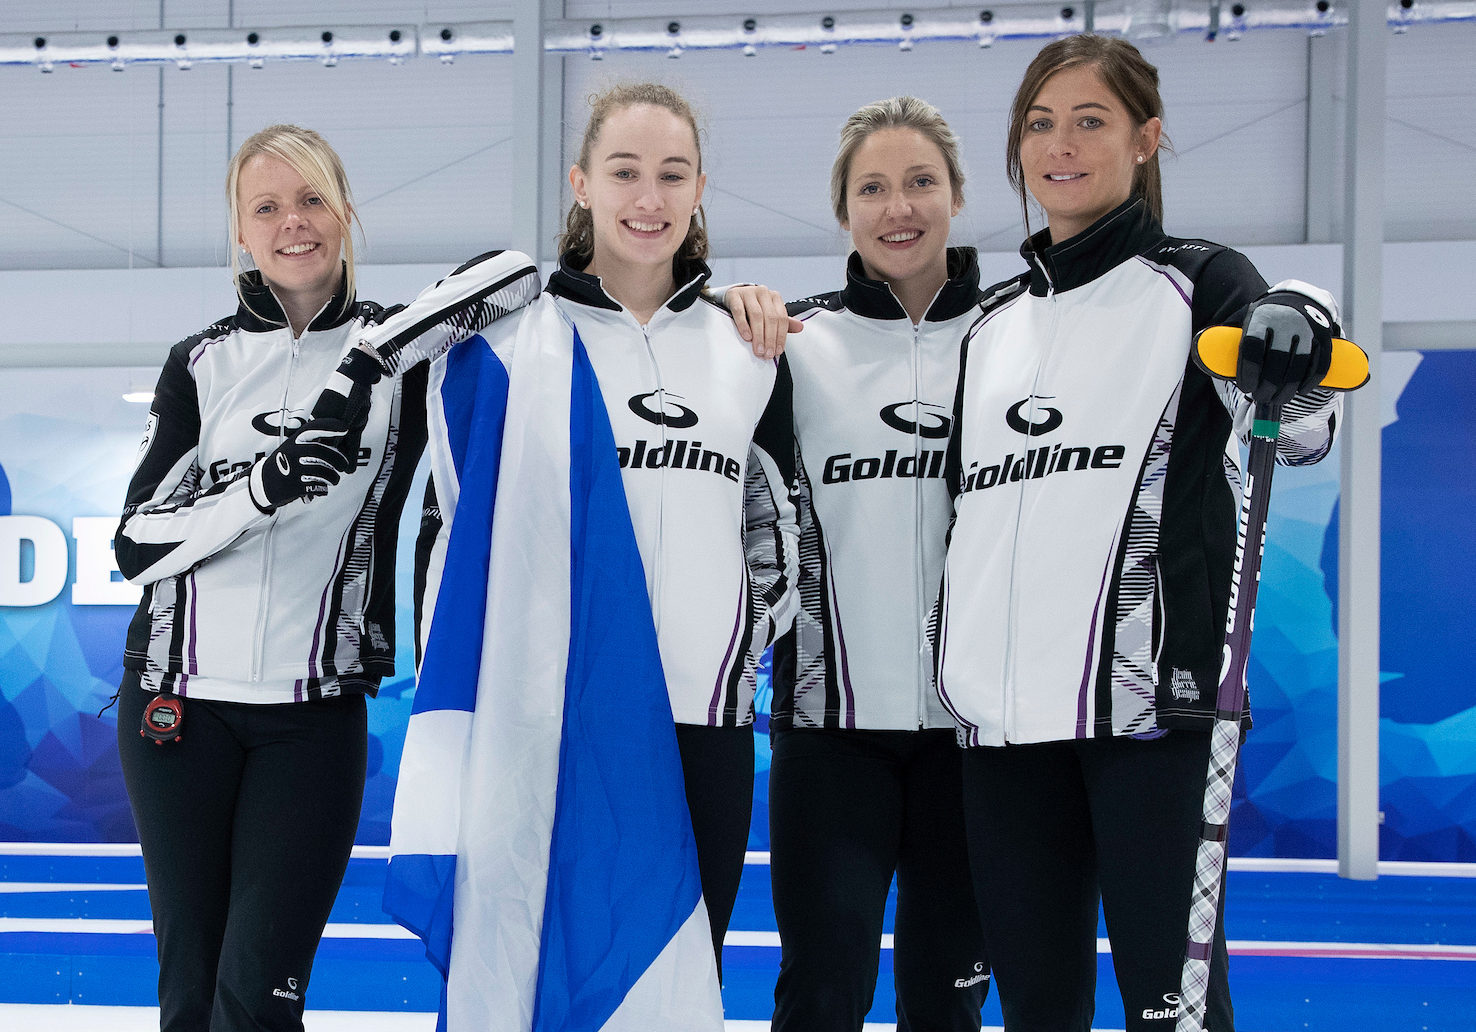 Team Muirhead hope to be flying the flag for Scotland at the World Championships.